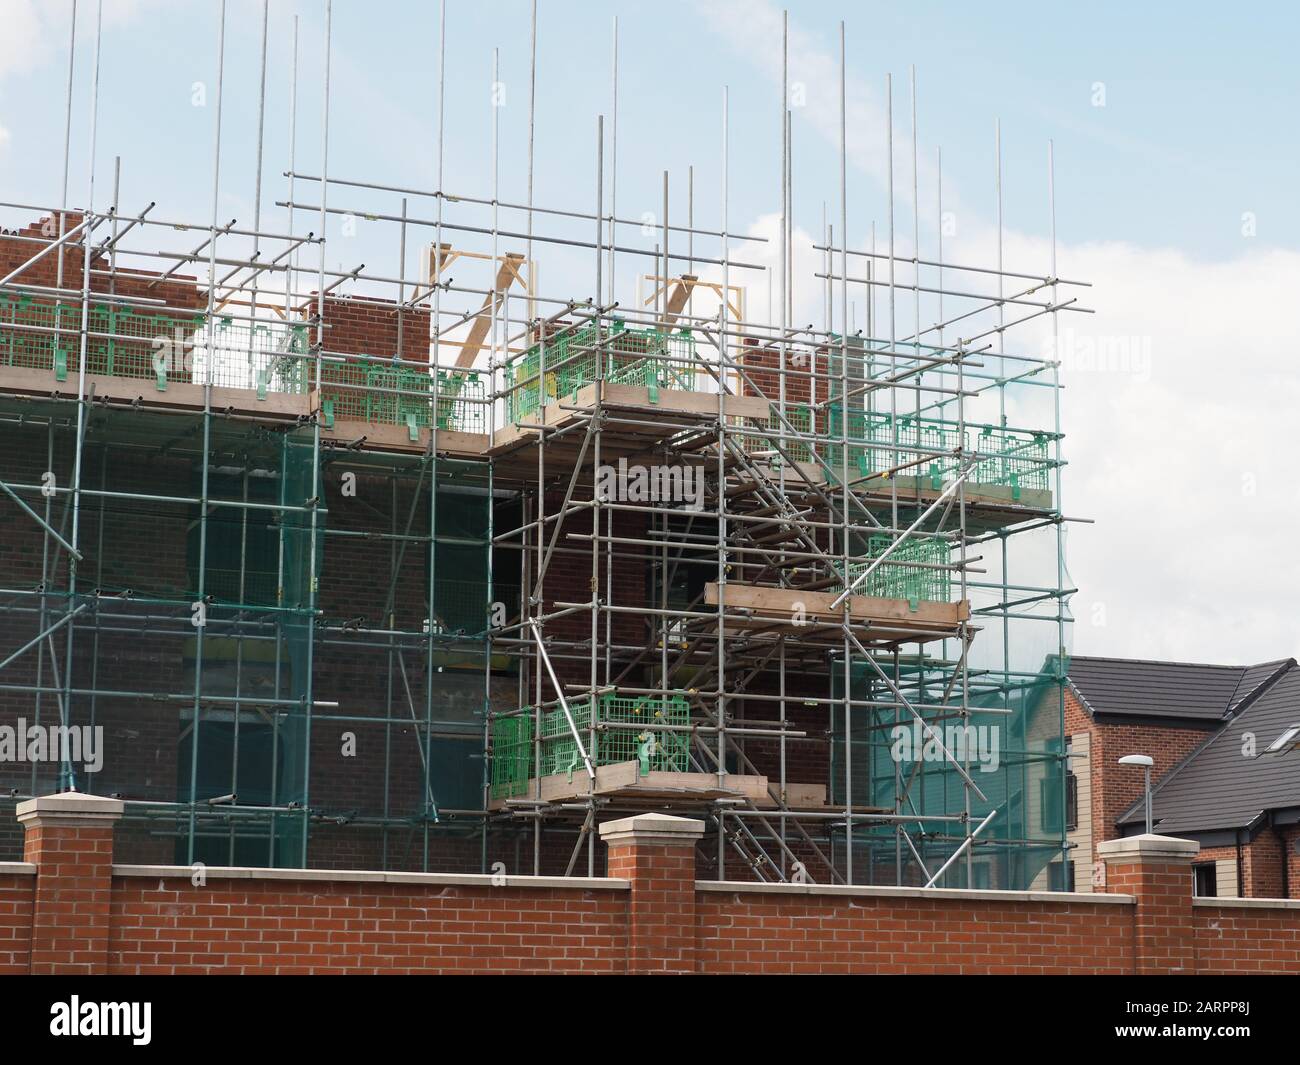 some new flats, apartments being built showing brickwork and scaffolding Stock Photo